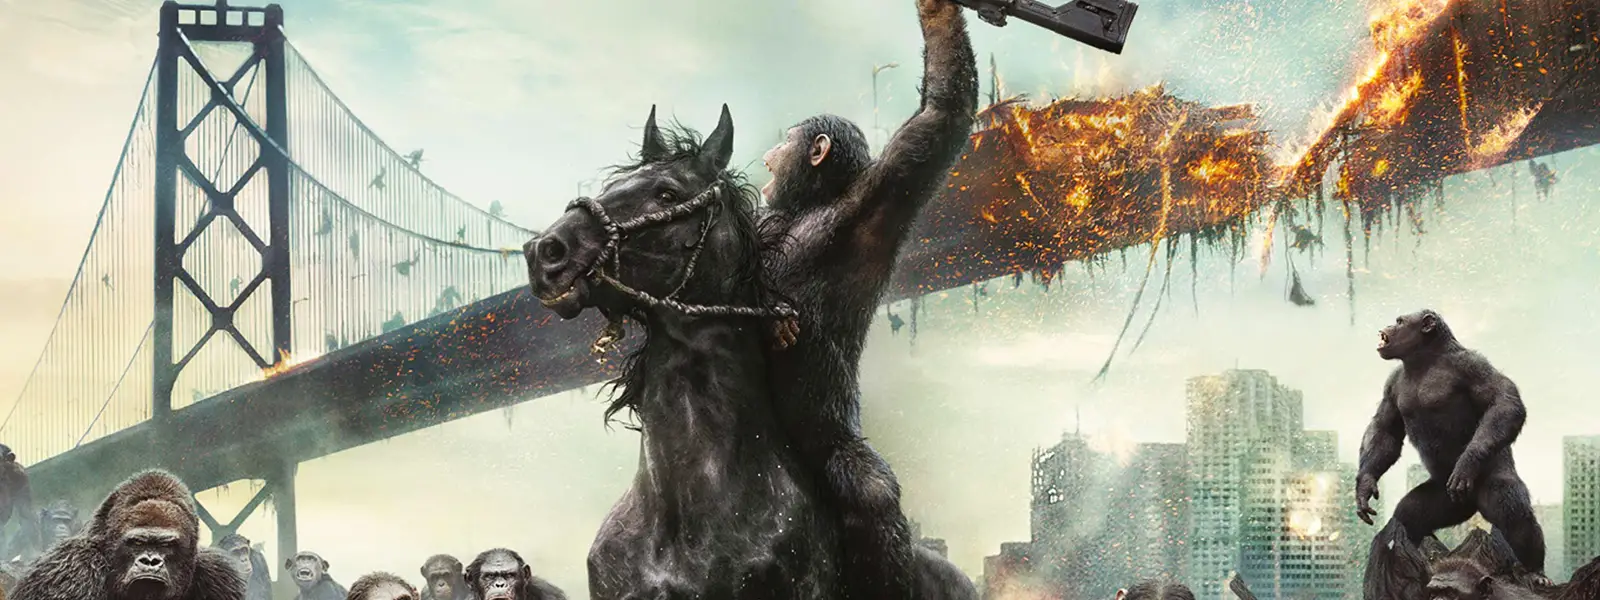 planet of the apes timeline banner art